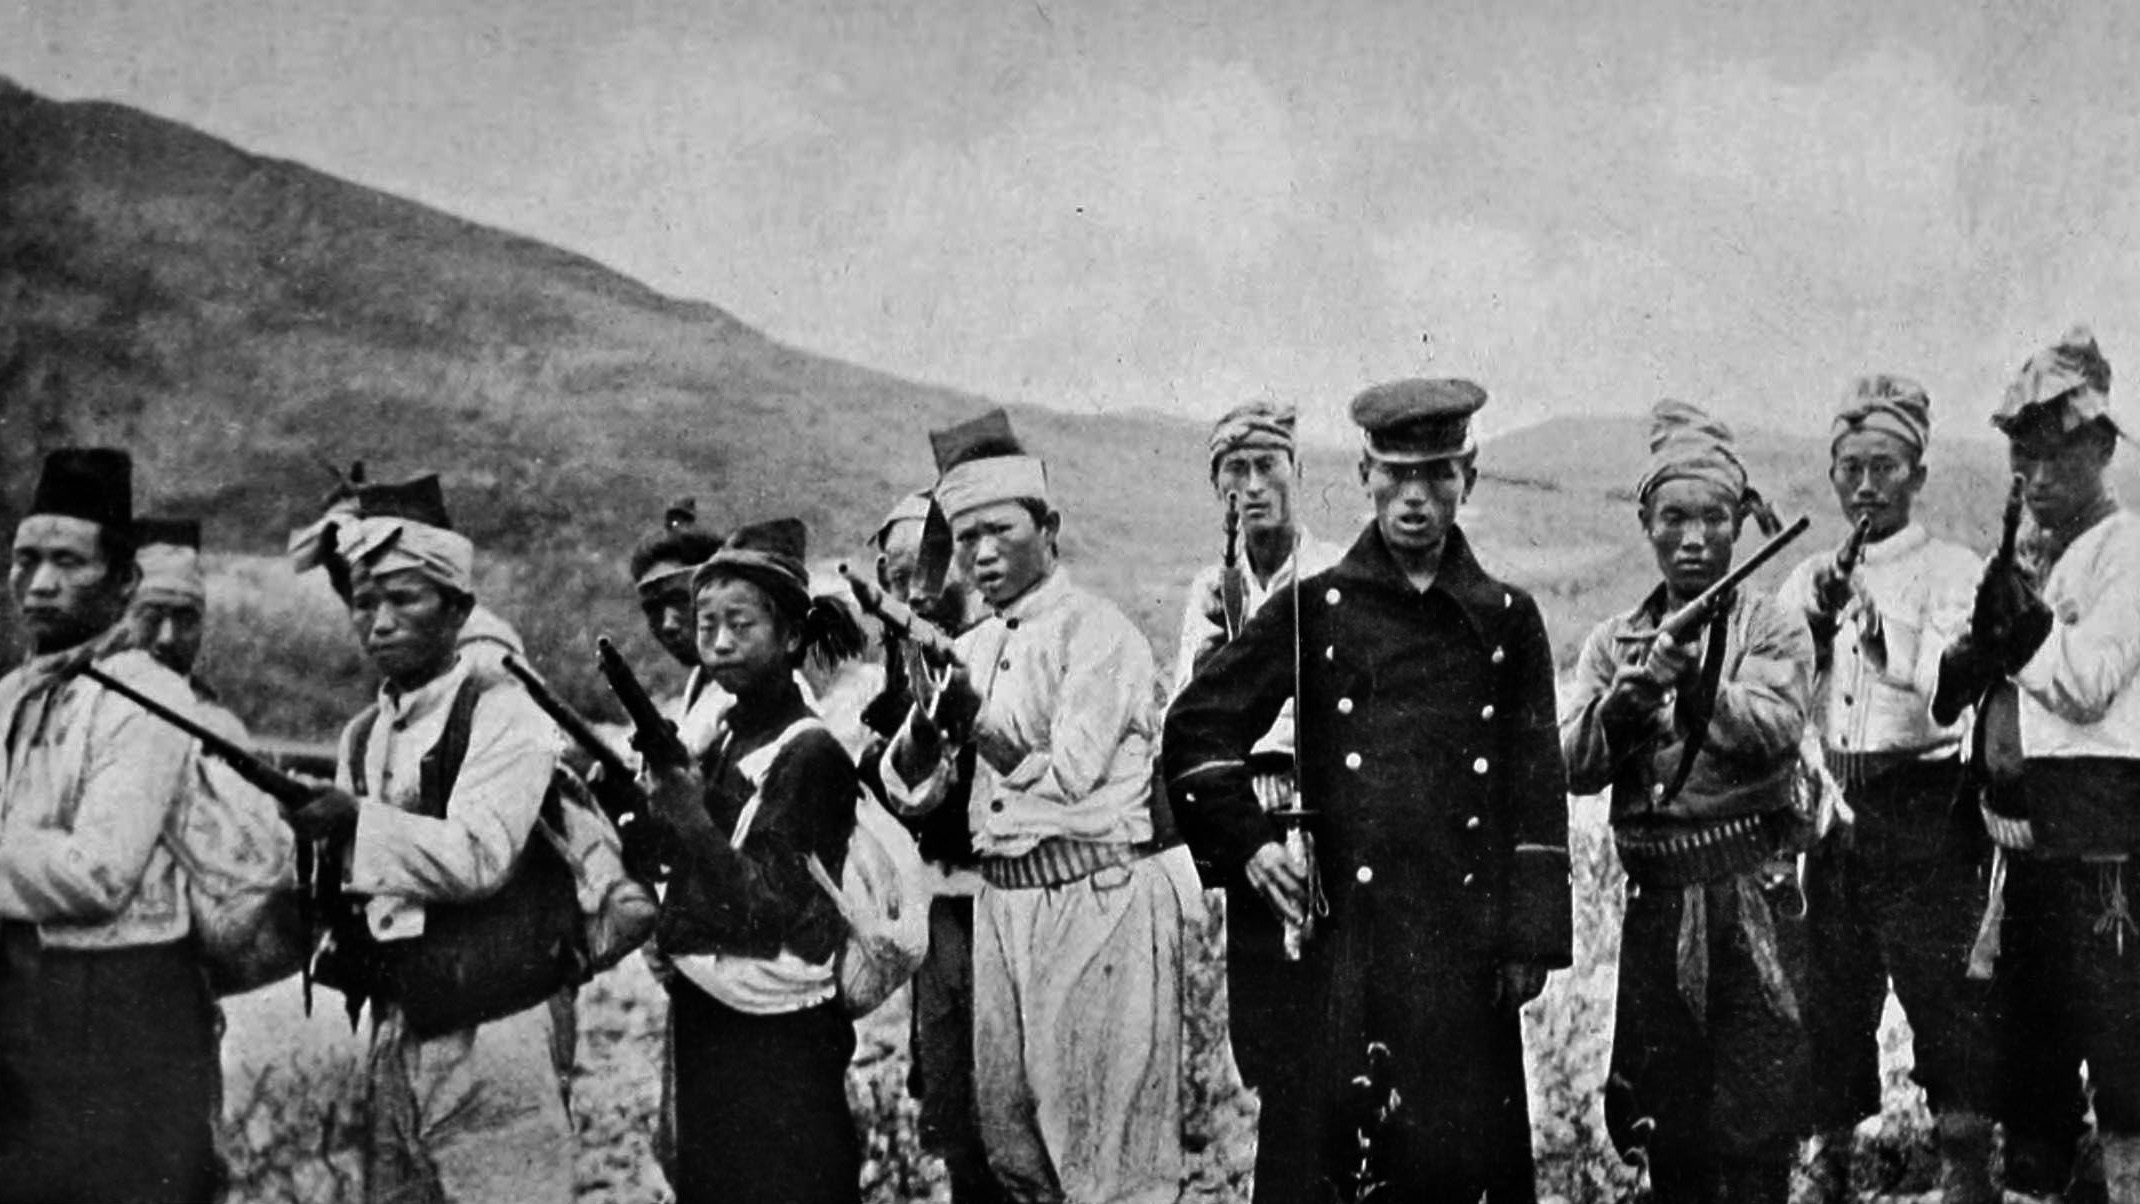 These fierce guerrilla troops are among a number of Koreans who rebelled against Japanese rule in the early 20th century. This photo was taken in 1907, three years prior to the Japanese annexation that essentially made Korea a vassal of the powerful island nation.